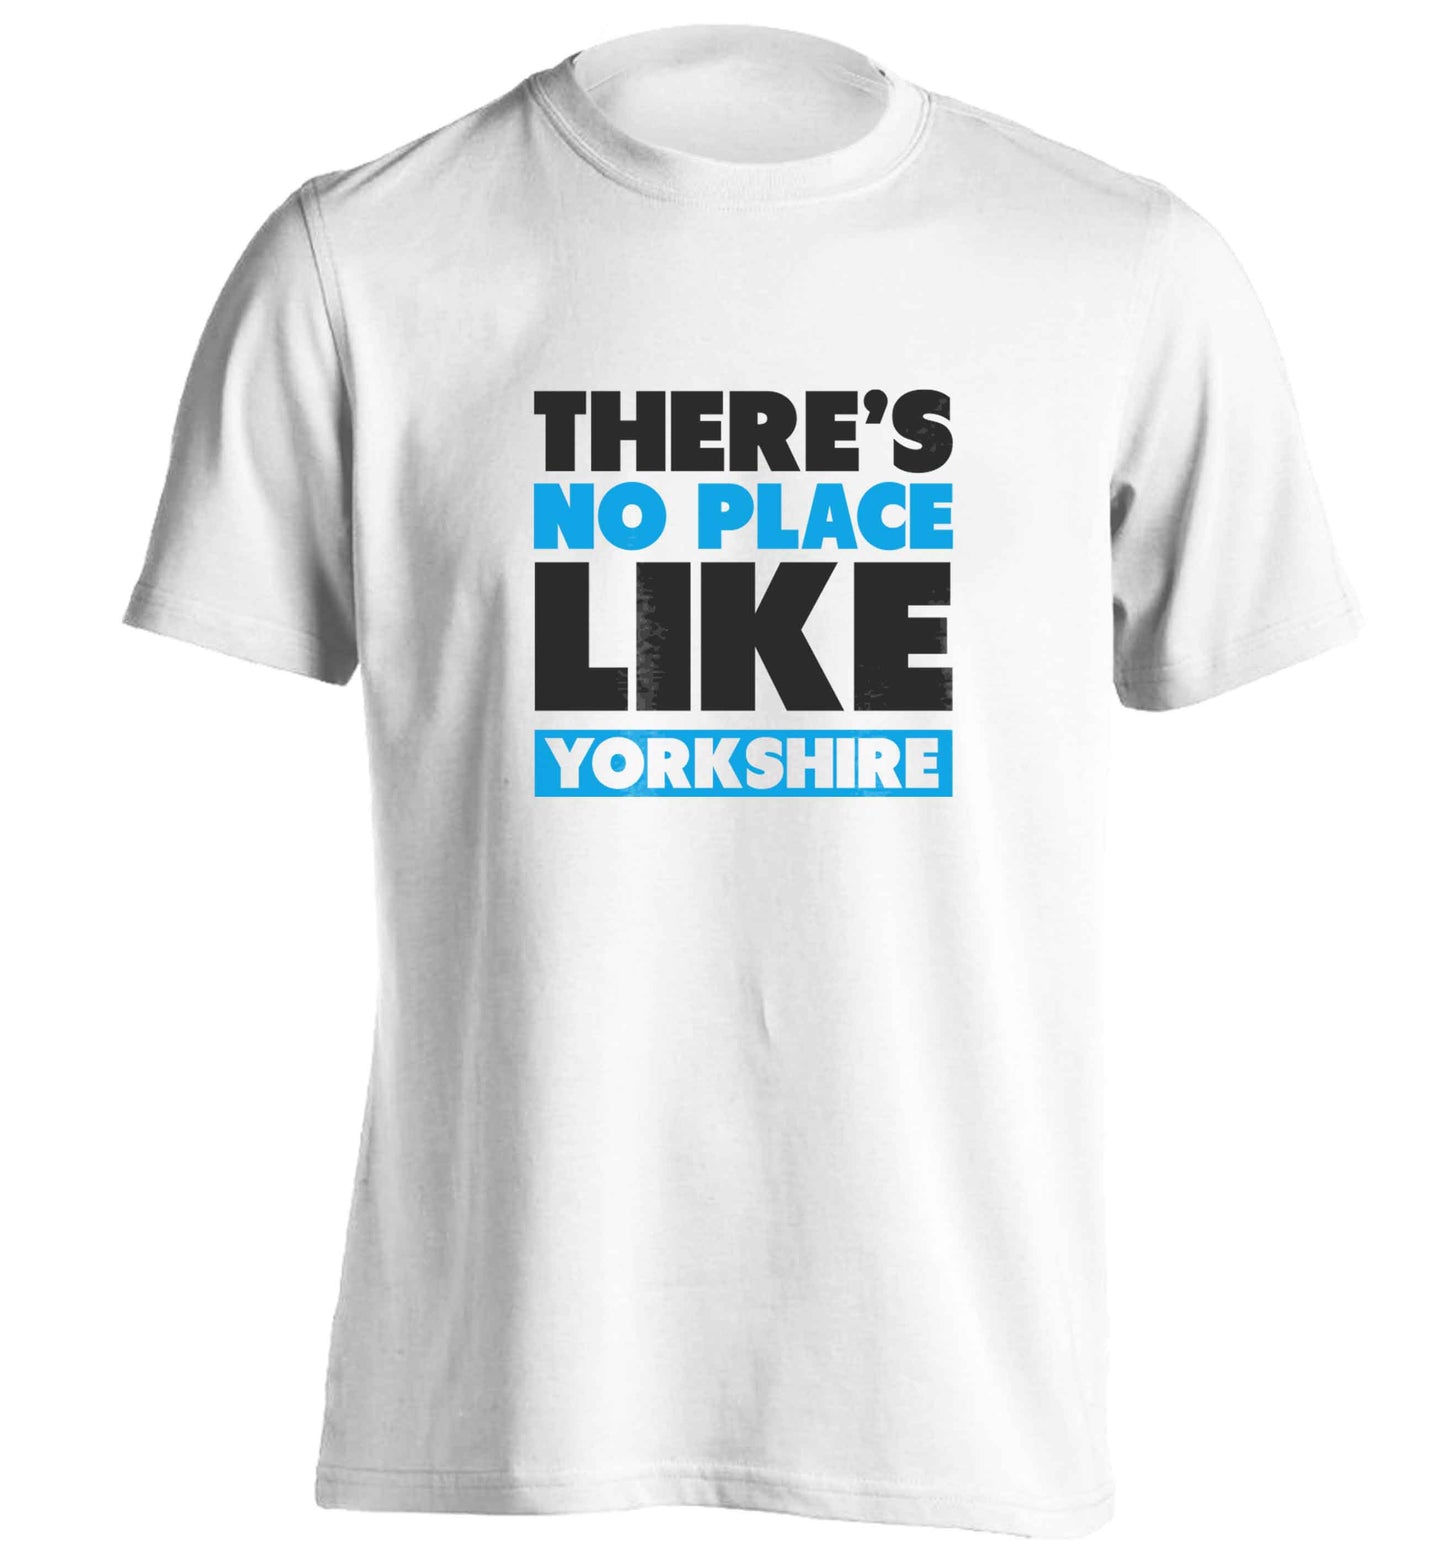 There's no place like Yorkshire adults unisex white Tshirt 2XL